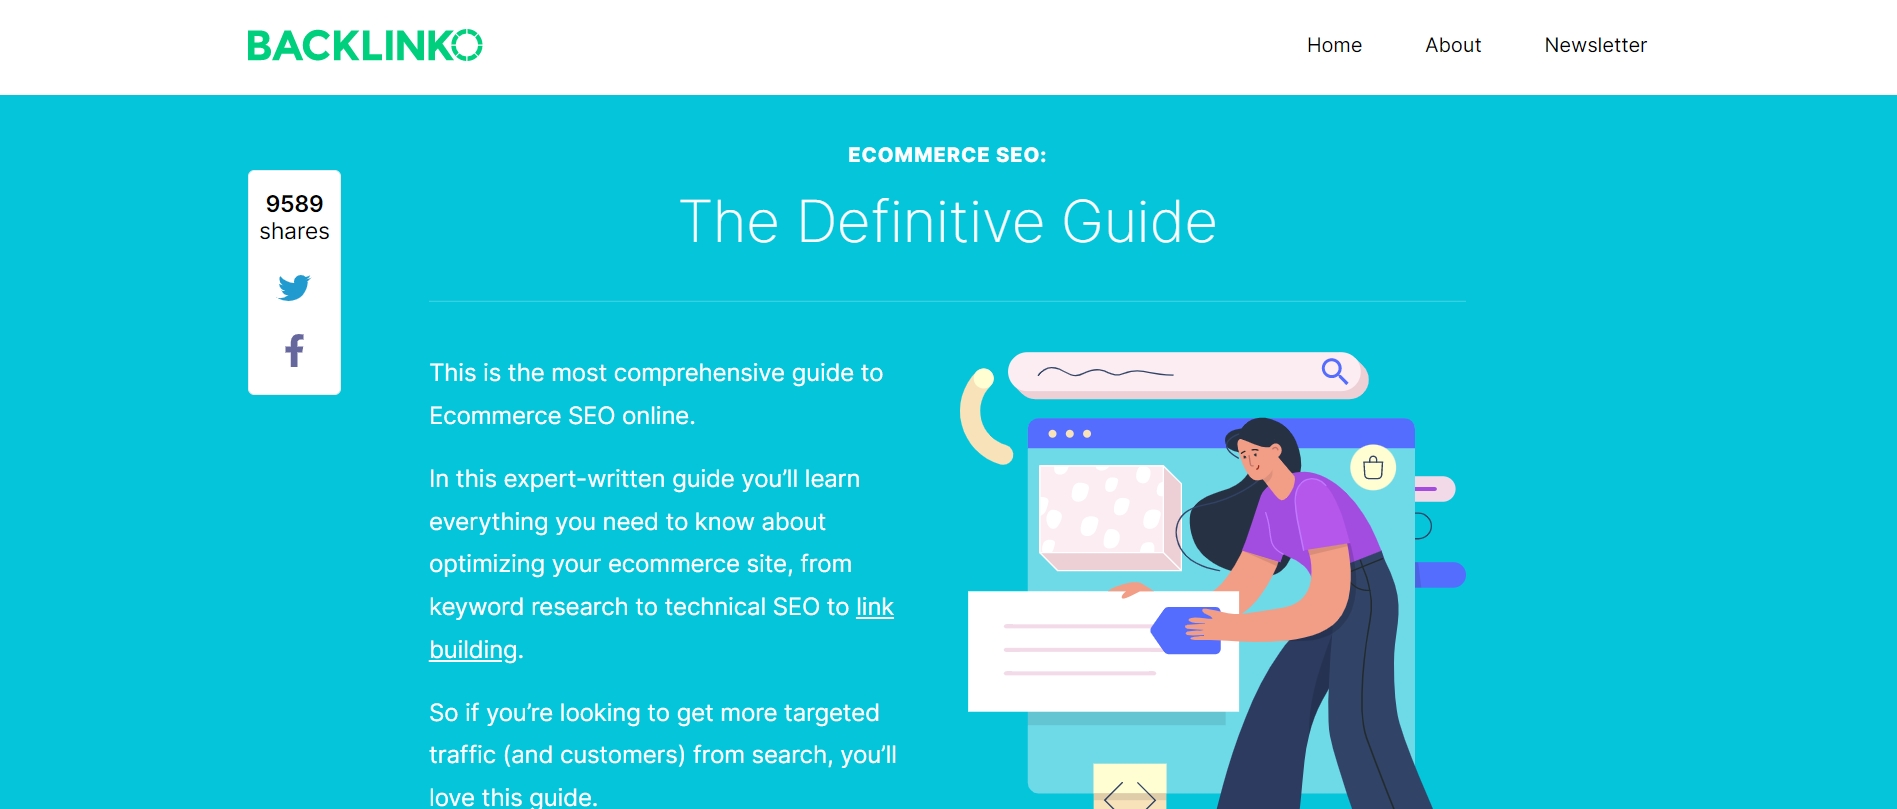 Best 8 eCommerce SEO Guides & Practices 02